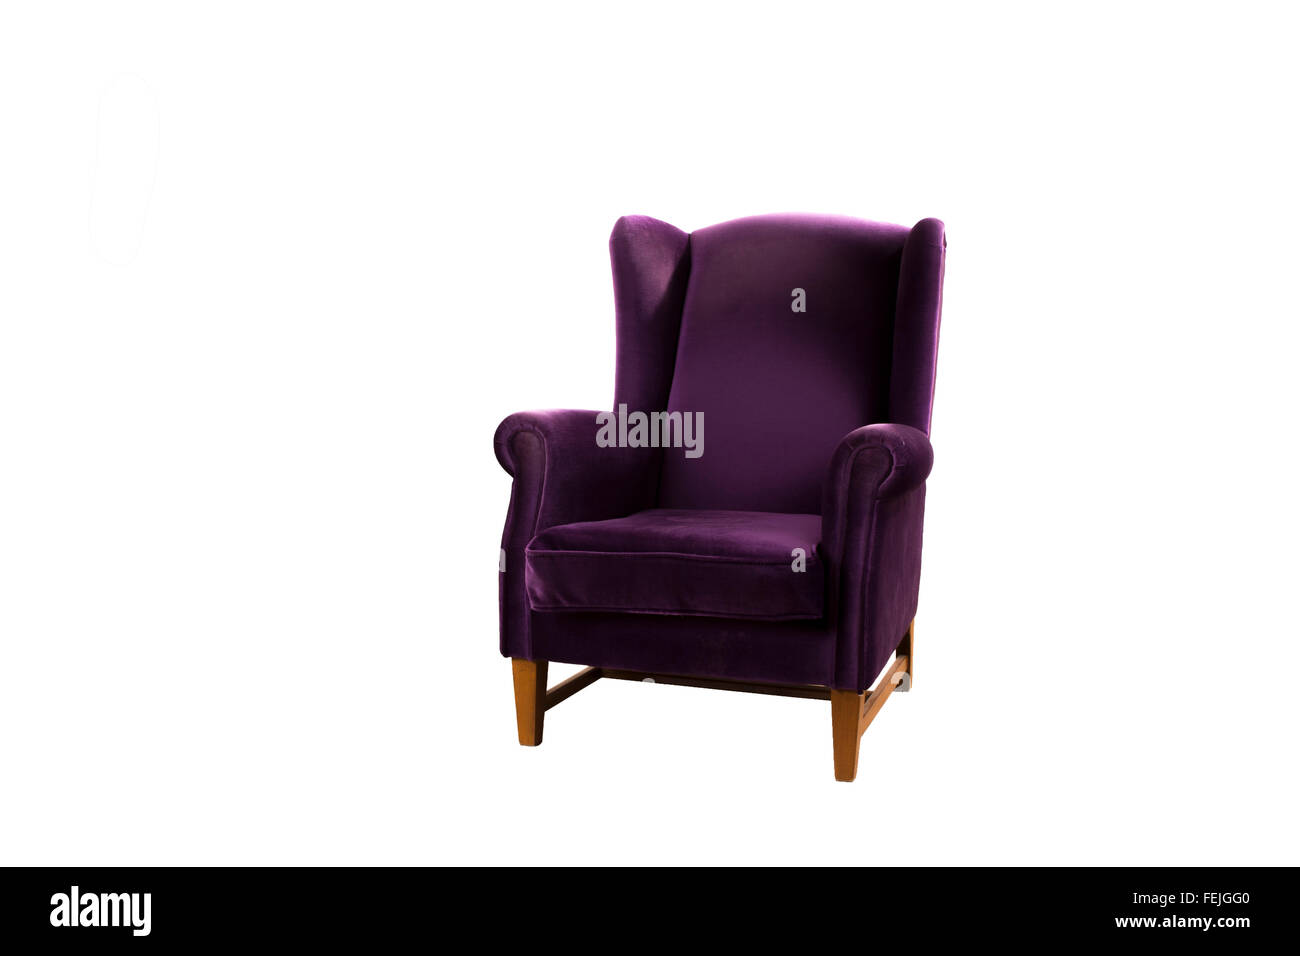 purple armchair isolated on white background Stock Photo